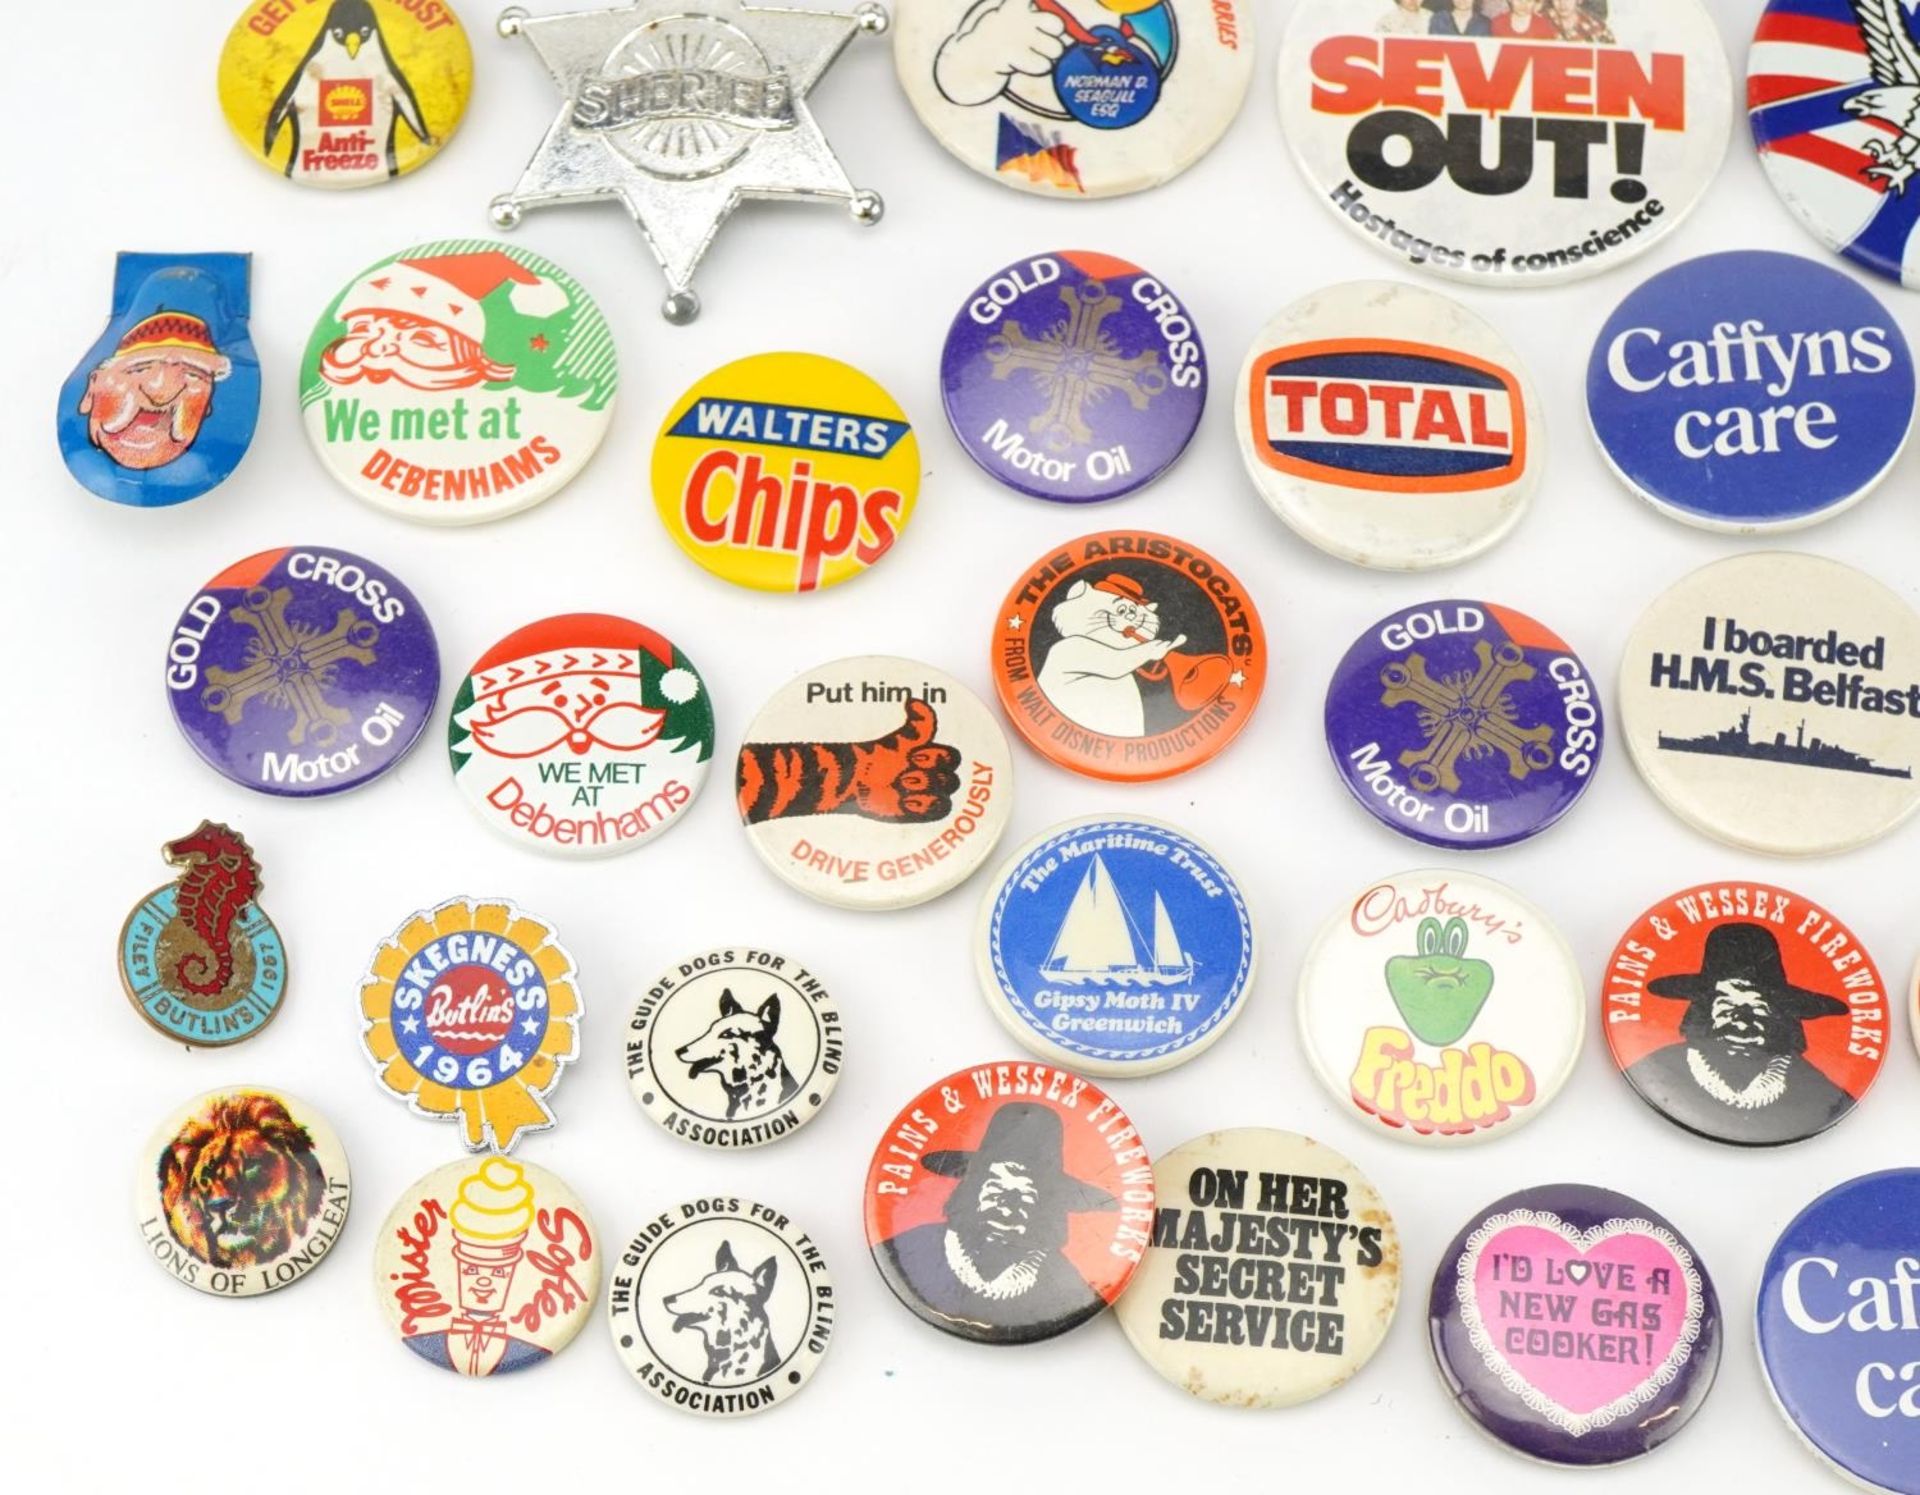 Collection of vintage and later pin badges including I'm Your Flexible Friend, I Boarded HMS - Bild 4 aus 6